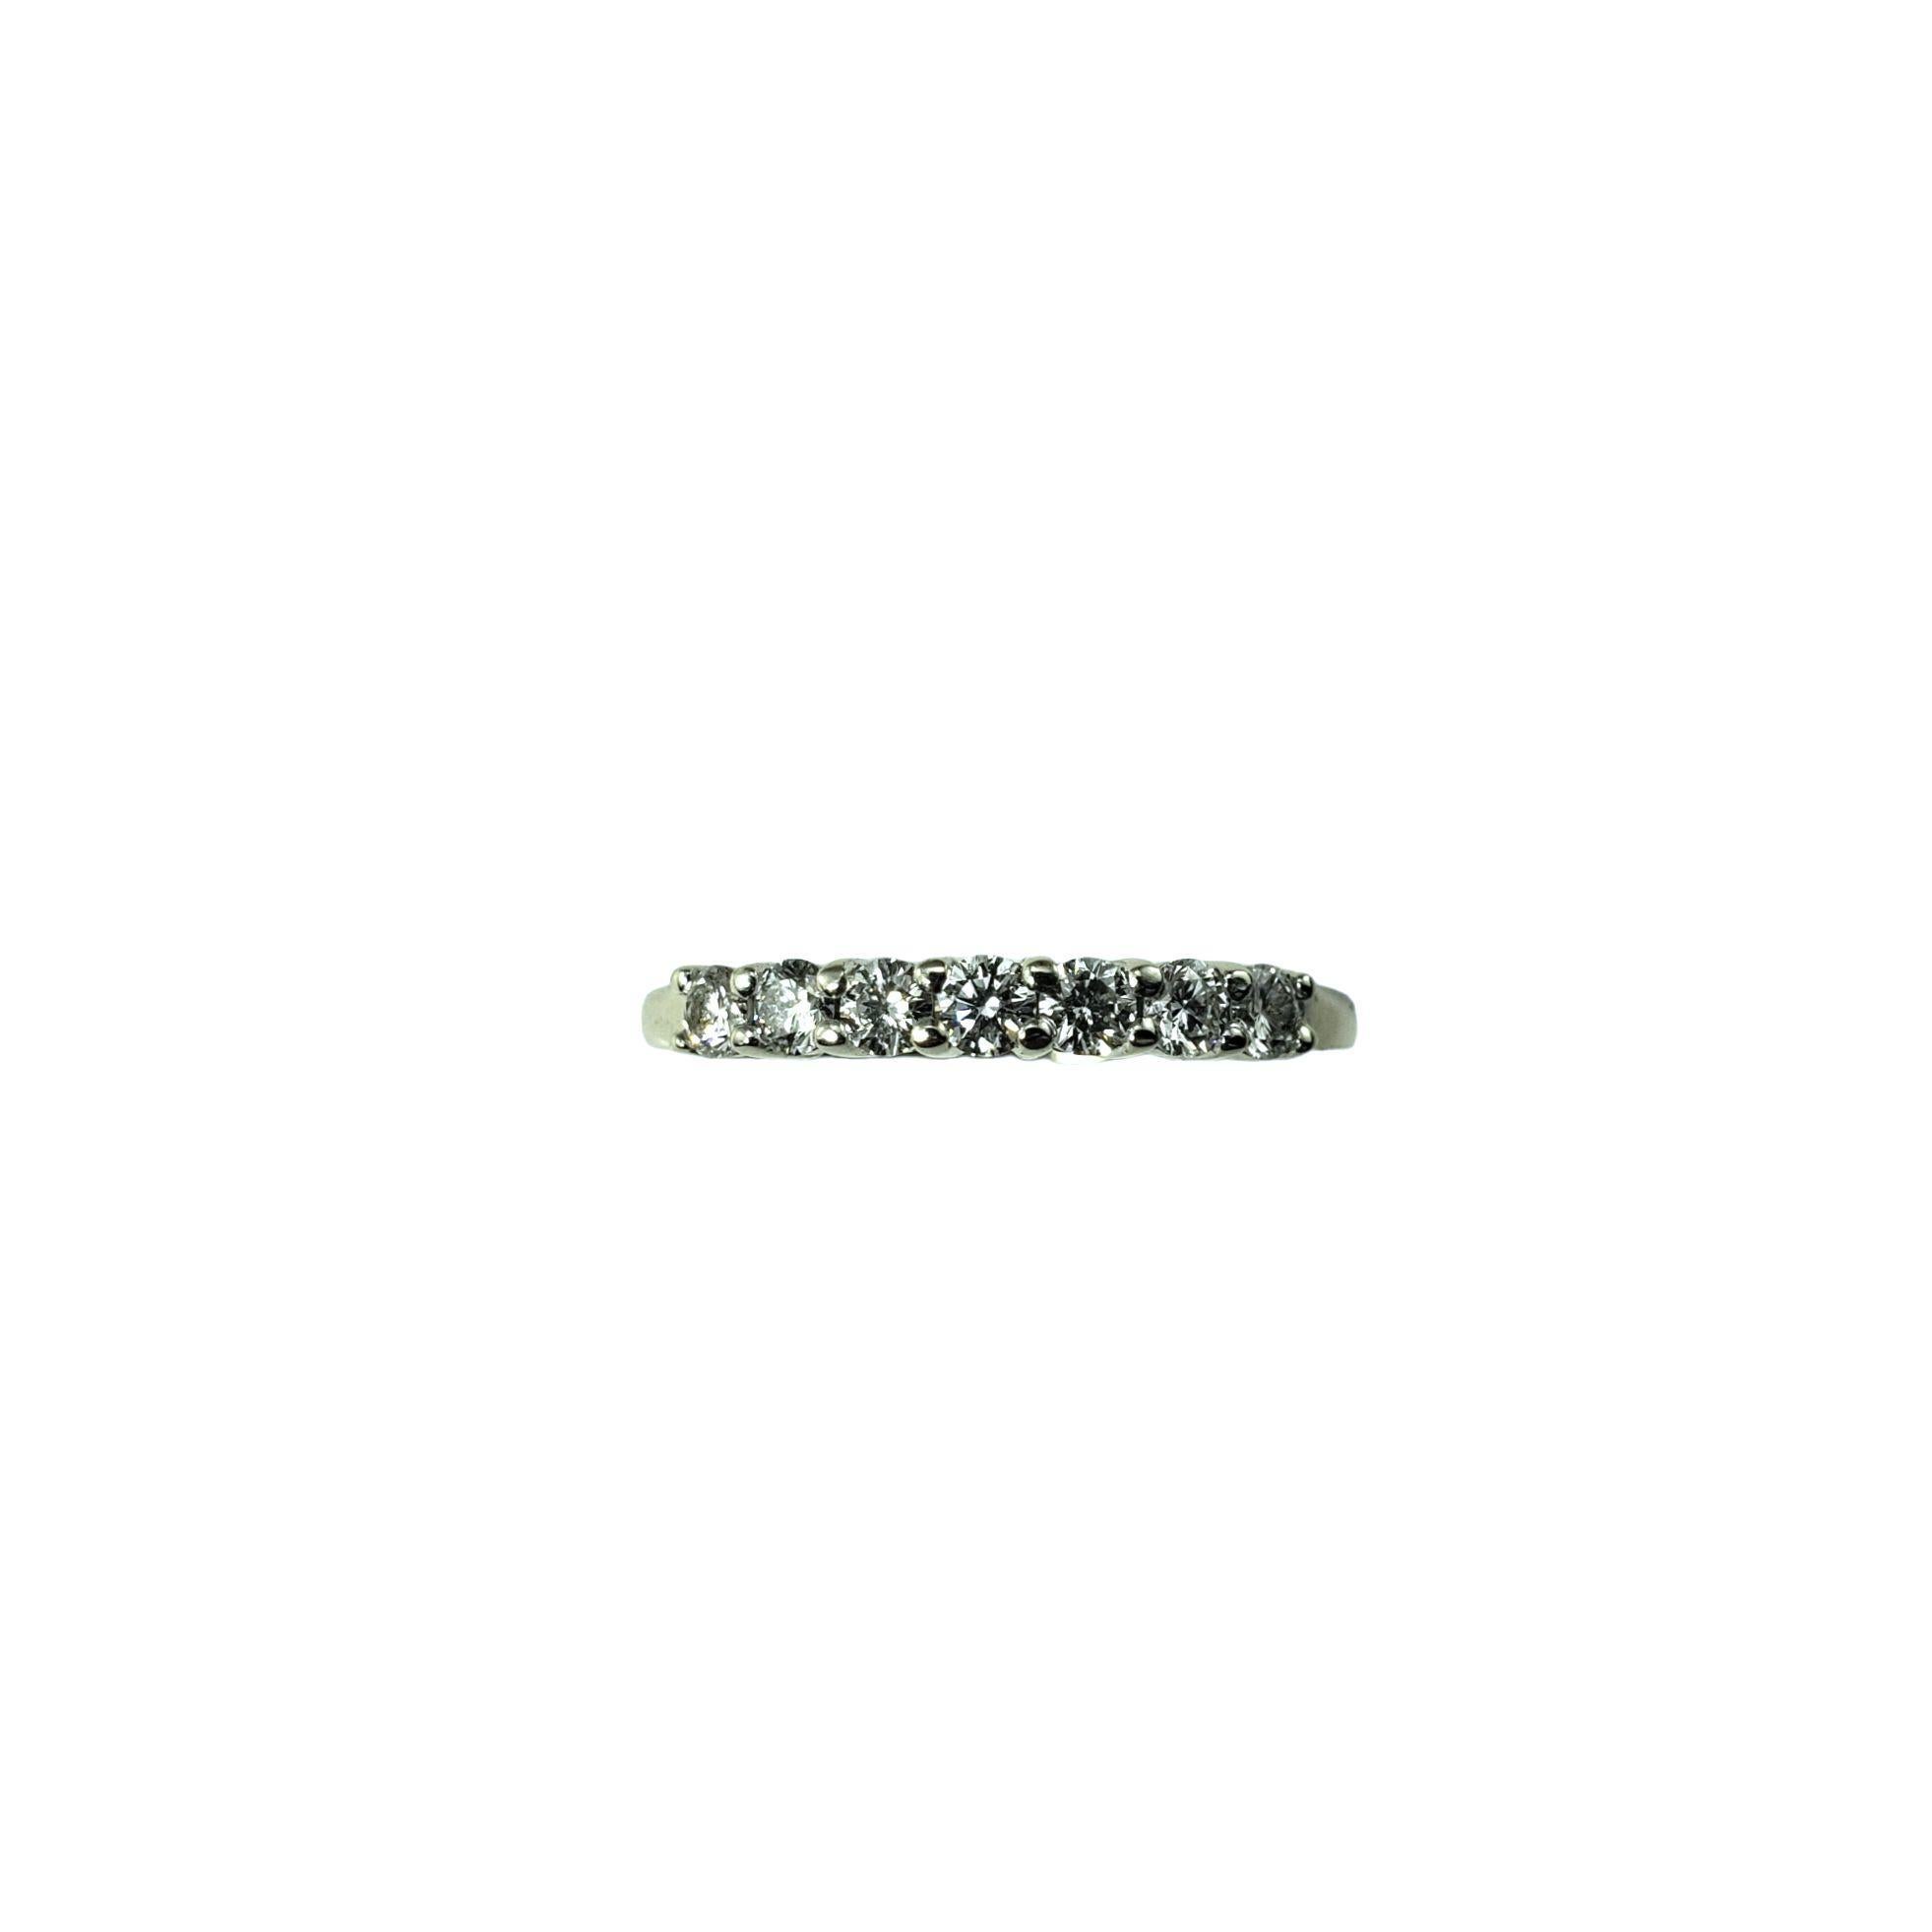 14 Karat White Gold and Diamond Wedding Band Ring Size 8-

This sparkling band features seven round brilliant cut diamonds set in classic 14K white gold. Width: 2.5 mm. Shank: 2 mm.

Approximate total diamond weight: .49 ct.

Diamond